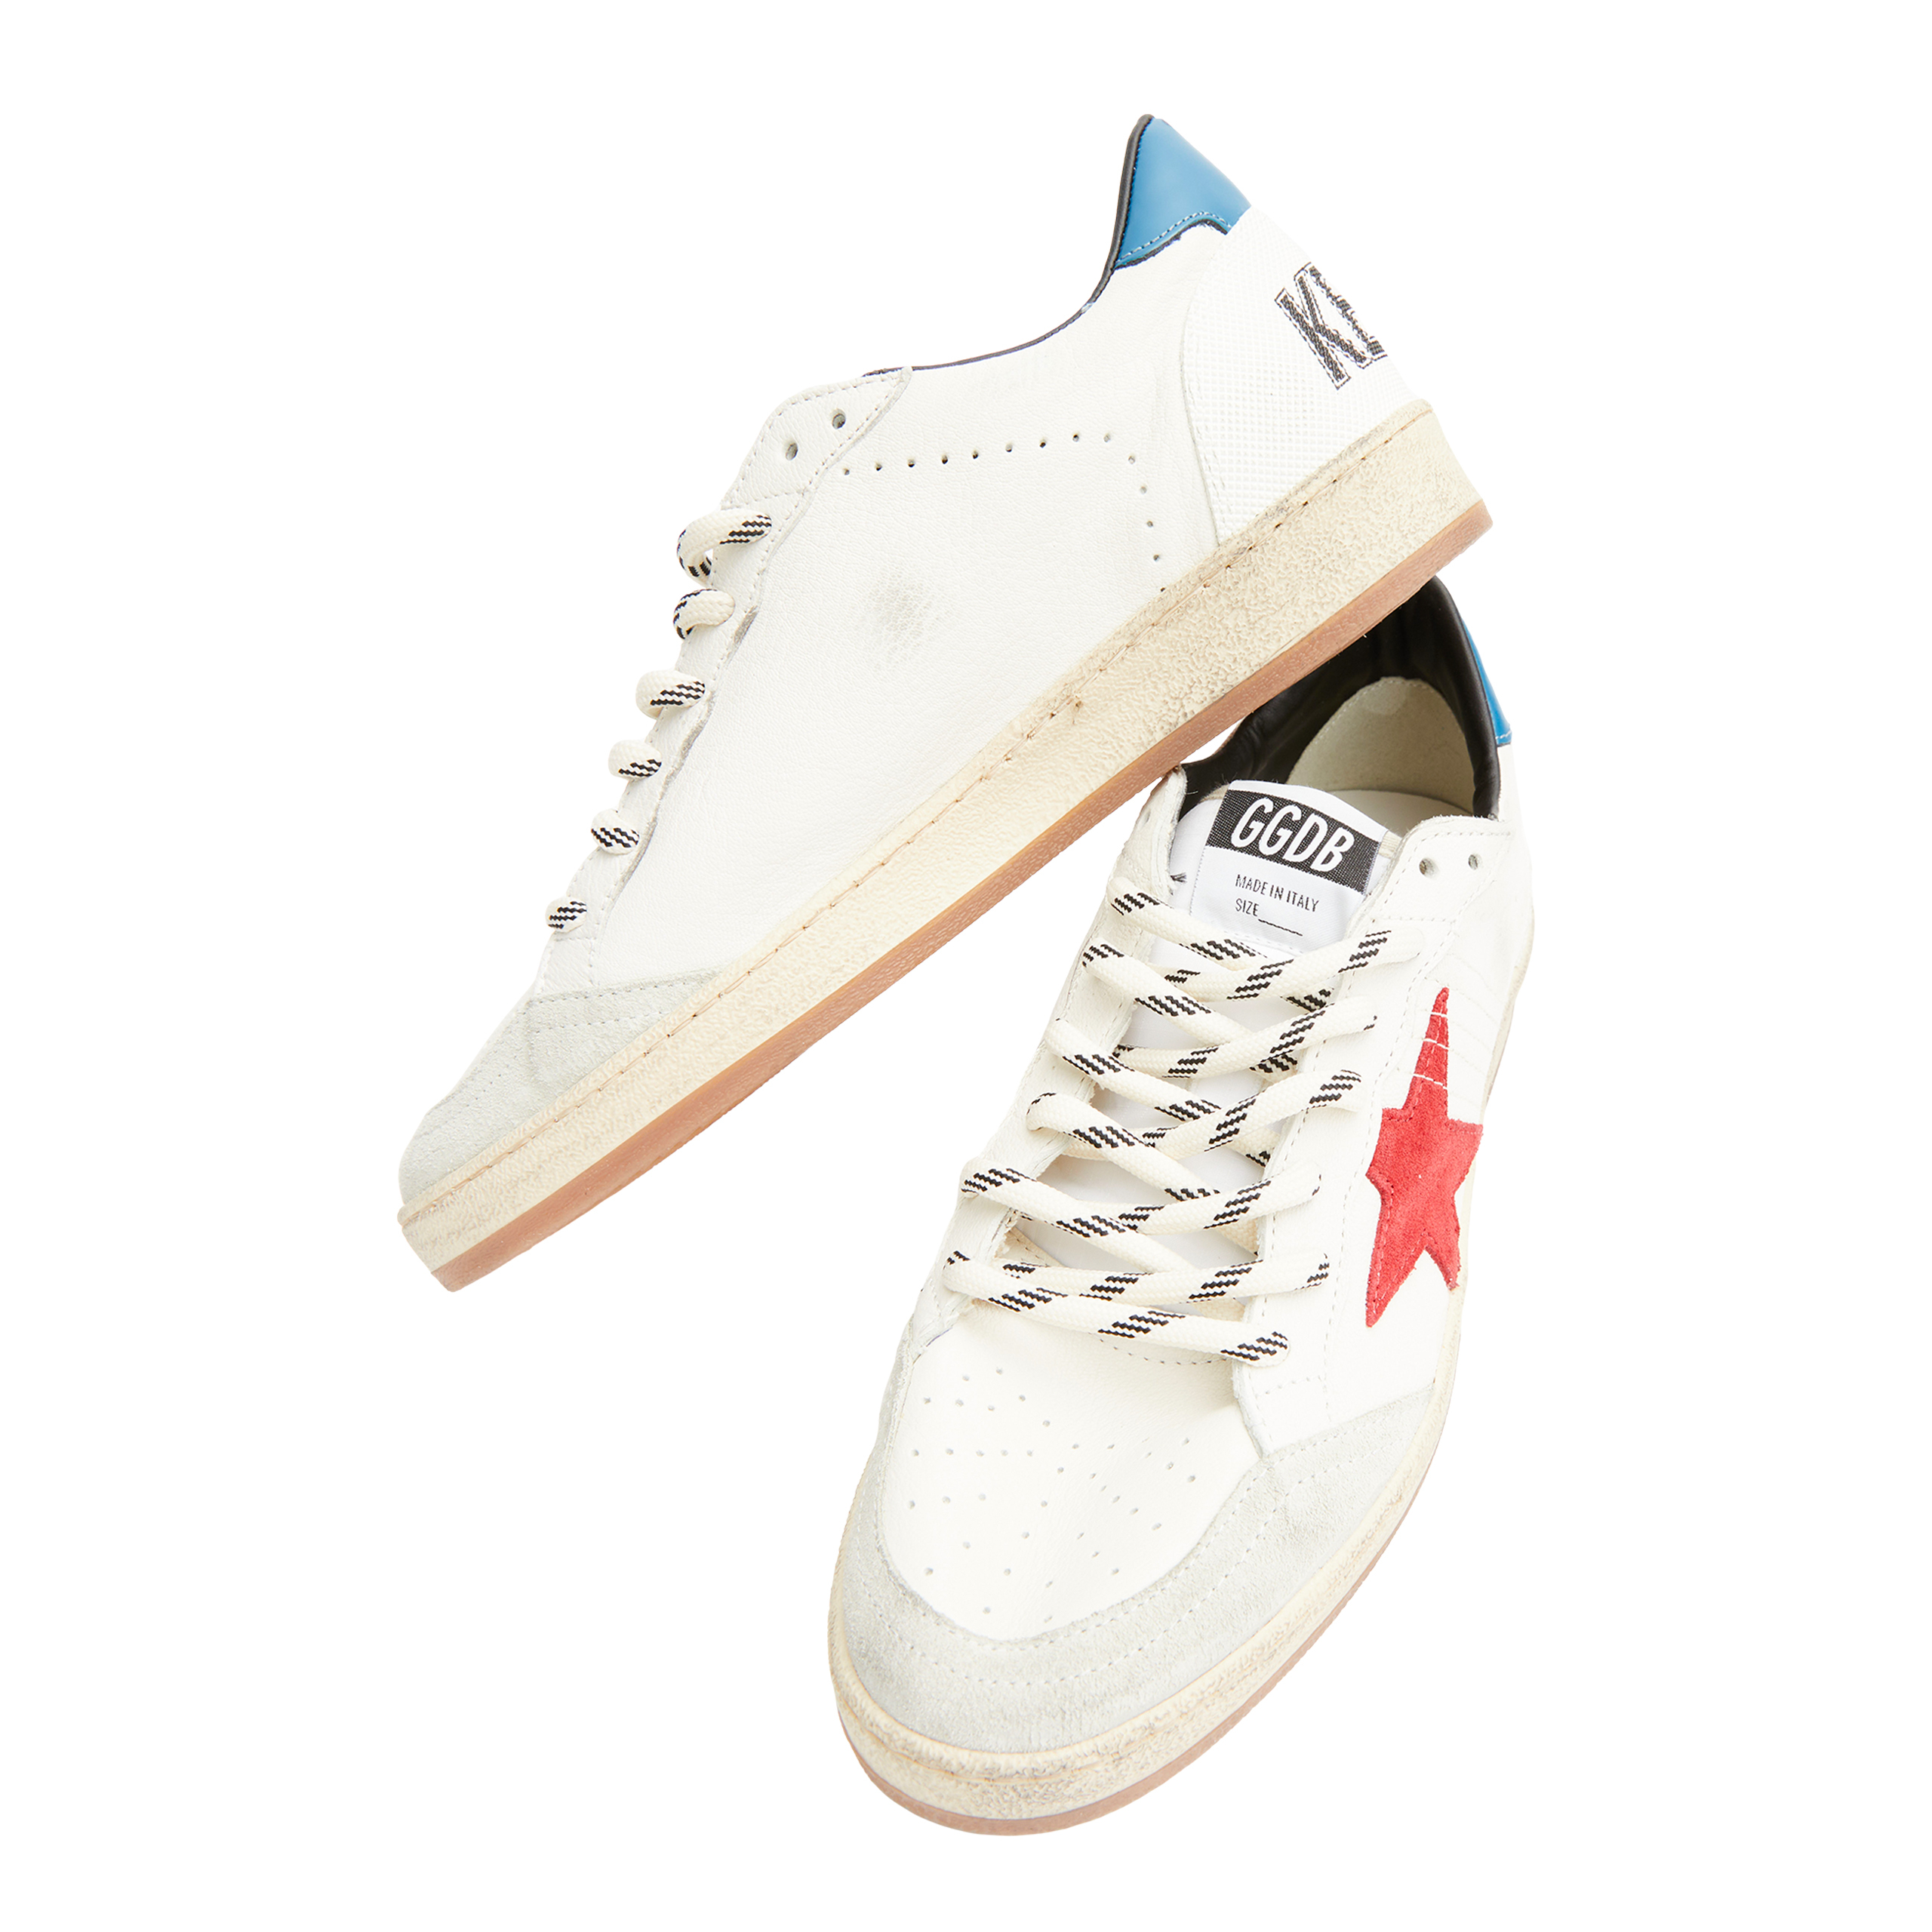 None Golden Goose Deluxe Brand GMF00117/F005403/11716, размер 39;40;41;42;43;44;45;46